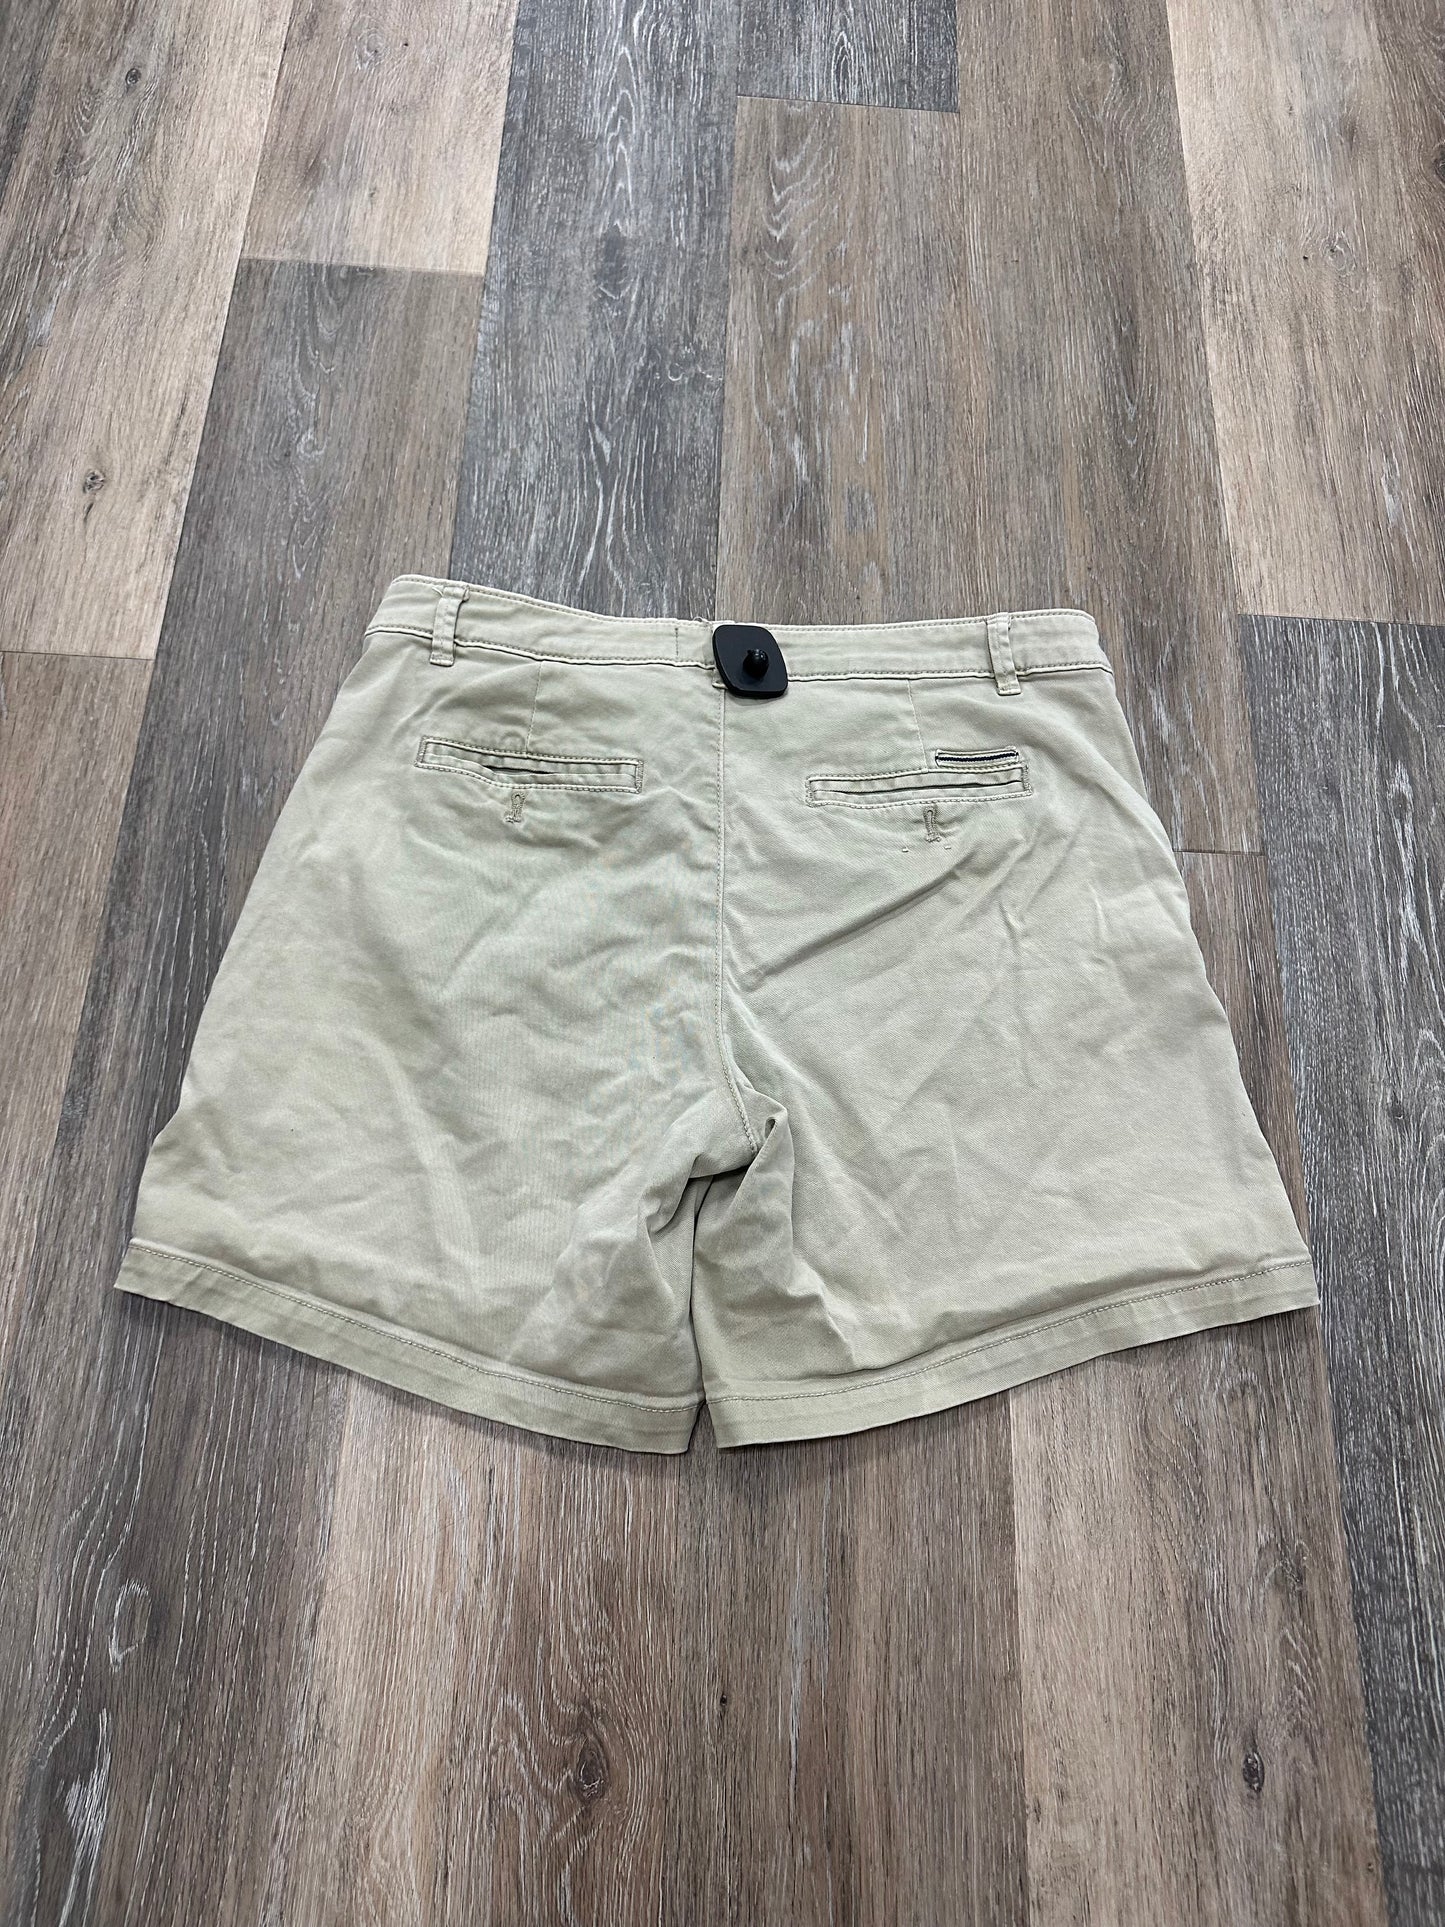 Shorts By Anthropologie  Size: 8